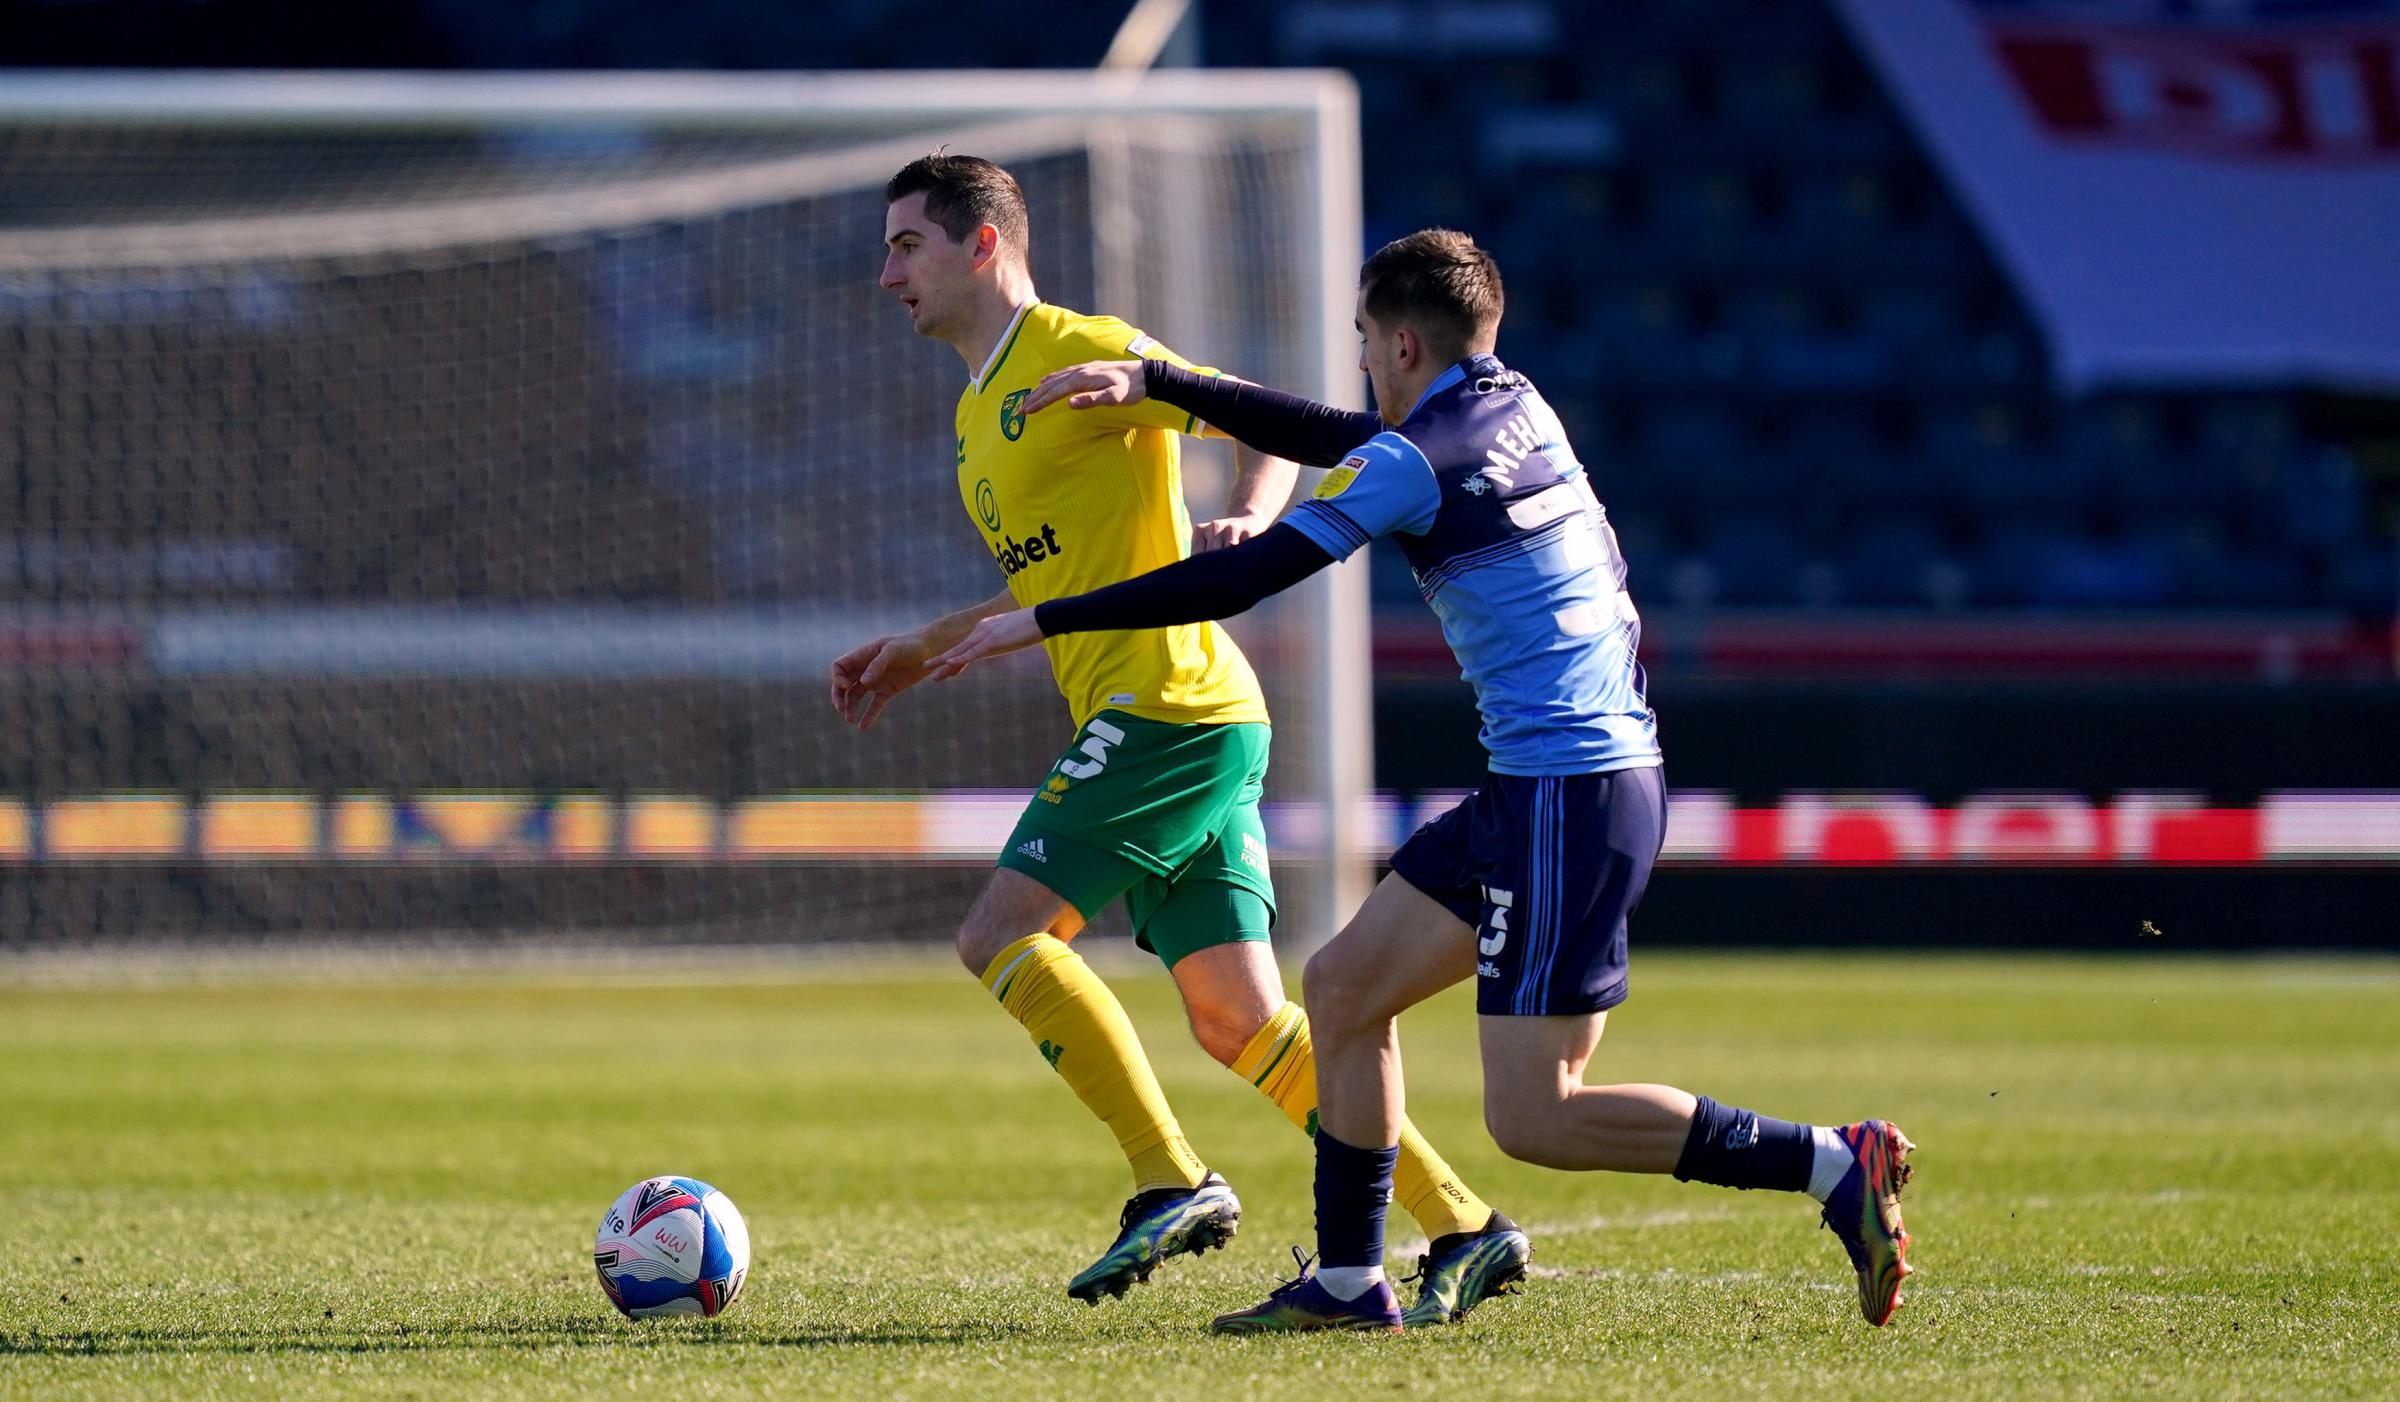 Kenny McClean, who played and scored in the PL for Norwich last season, gets past Anis Mehmeti (PA)